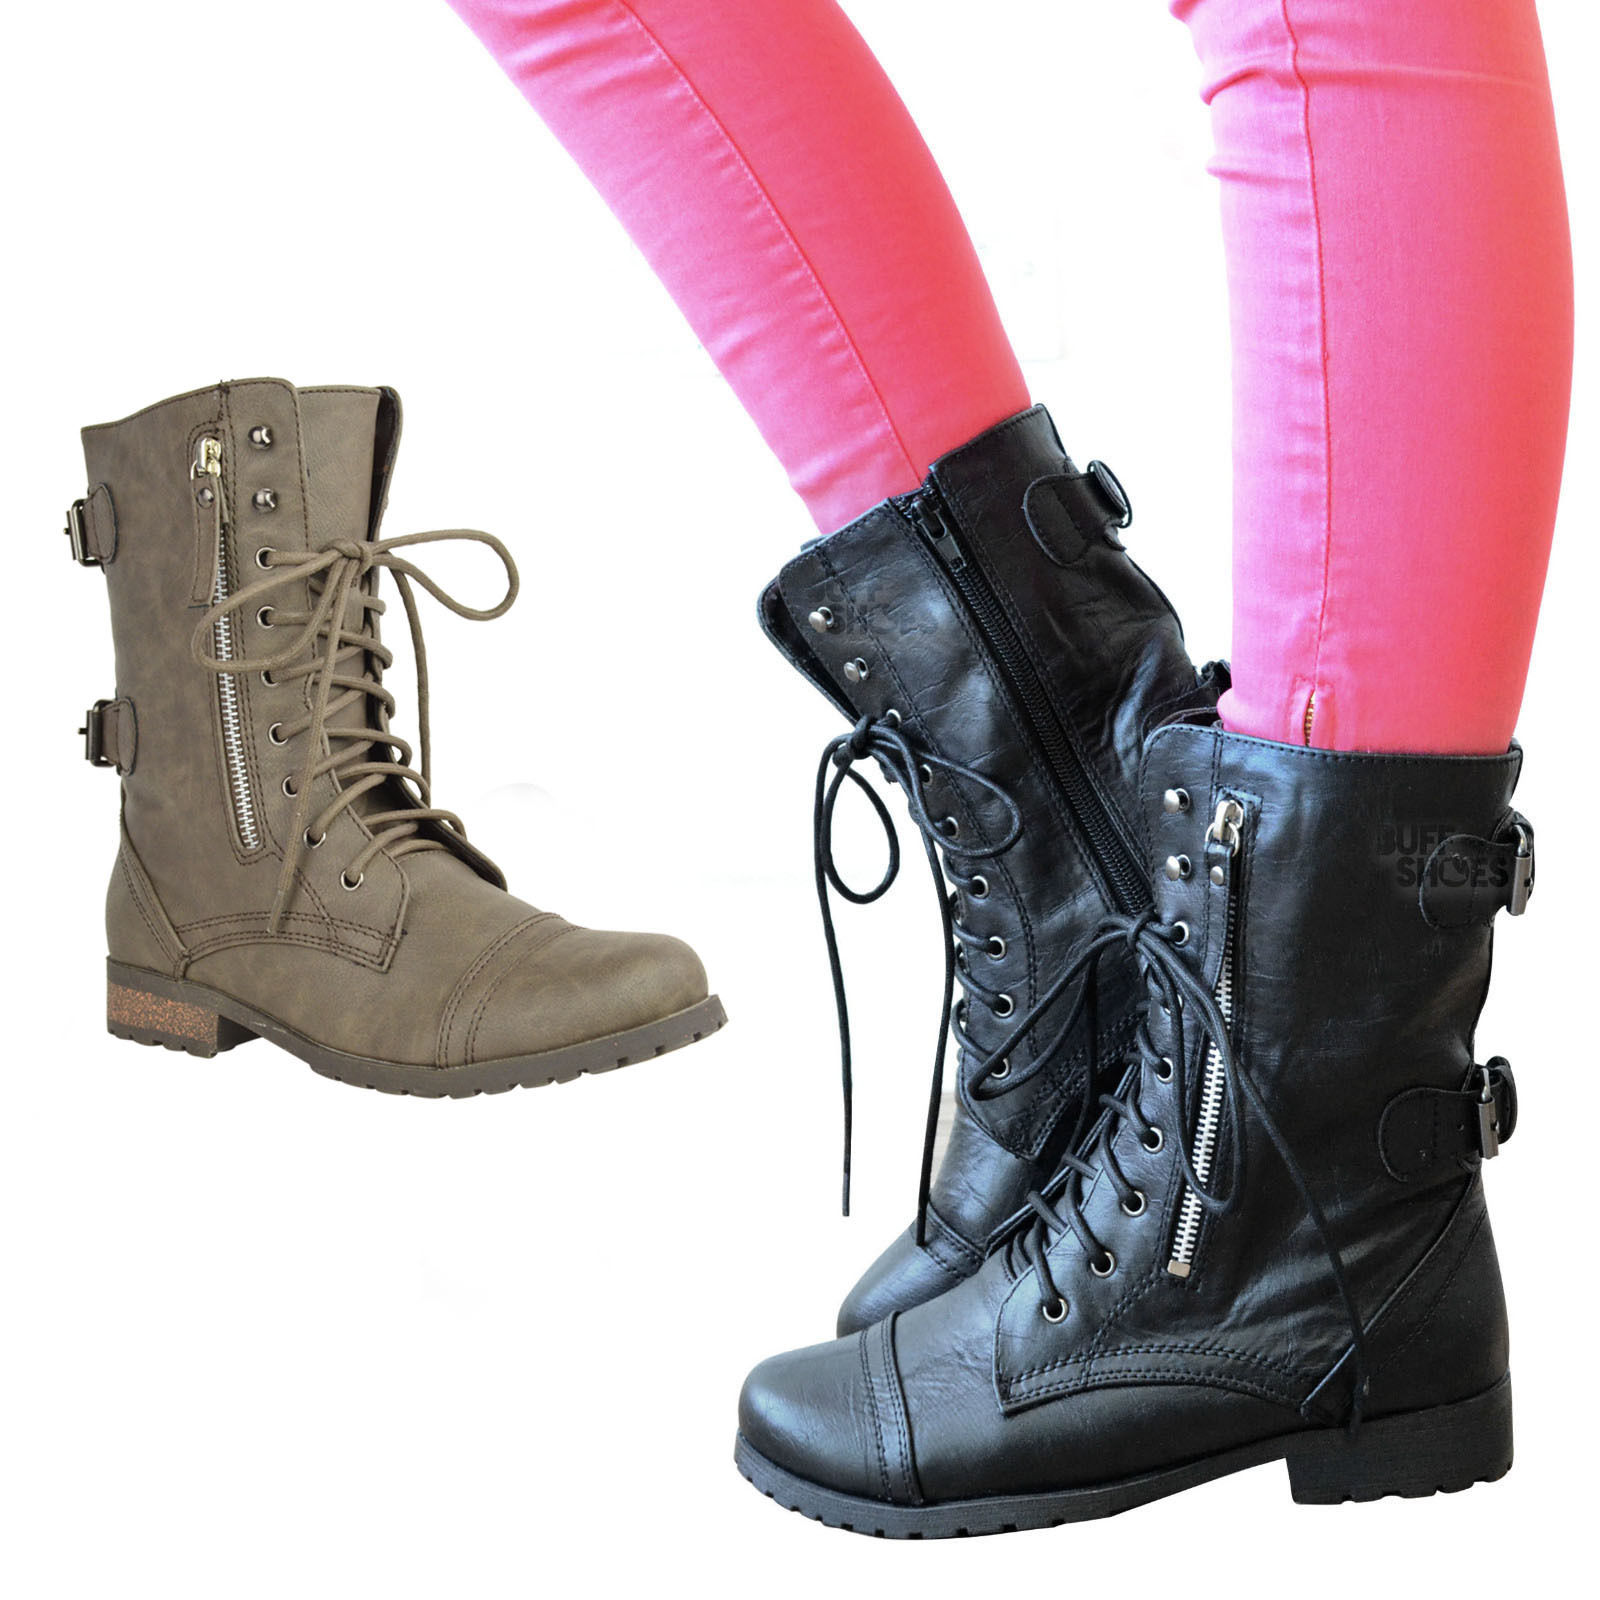 LADIES WOMENS MILITARY BOOTS ARMY COMBAT ANKLE LACE UP FLAT BIKER ZIP SIZES 3-8